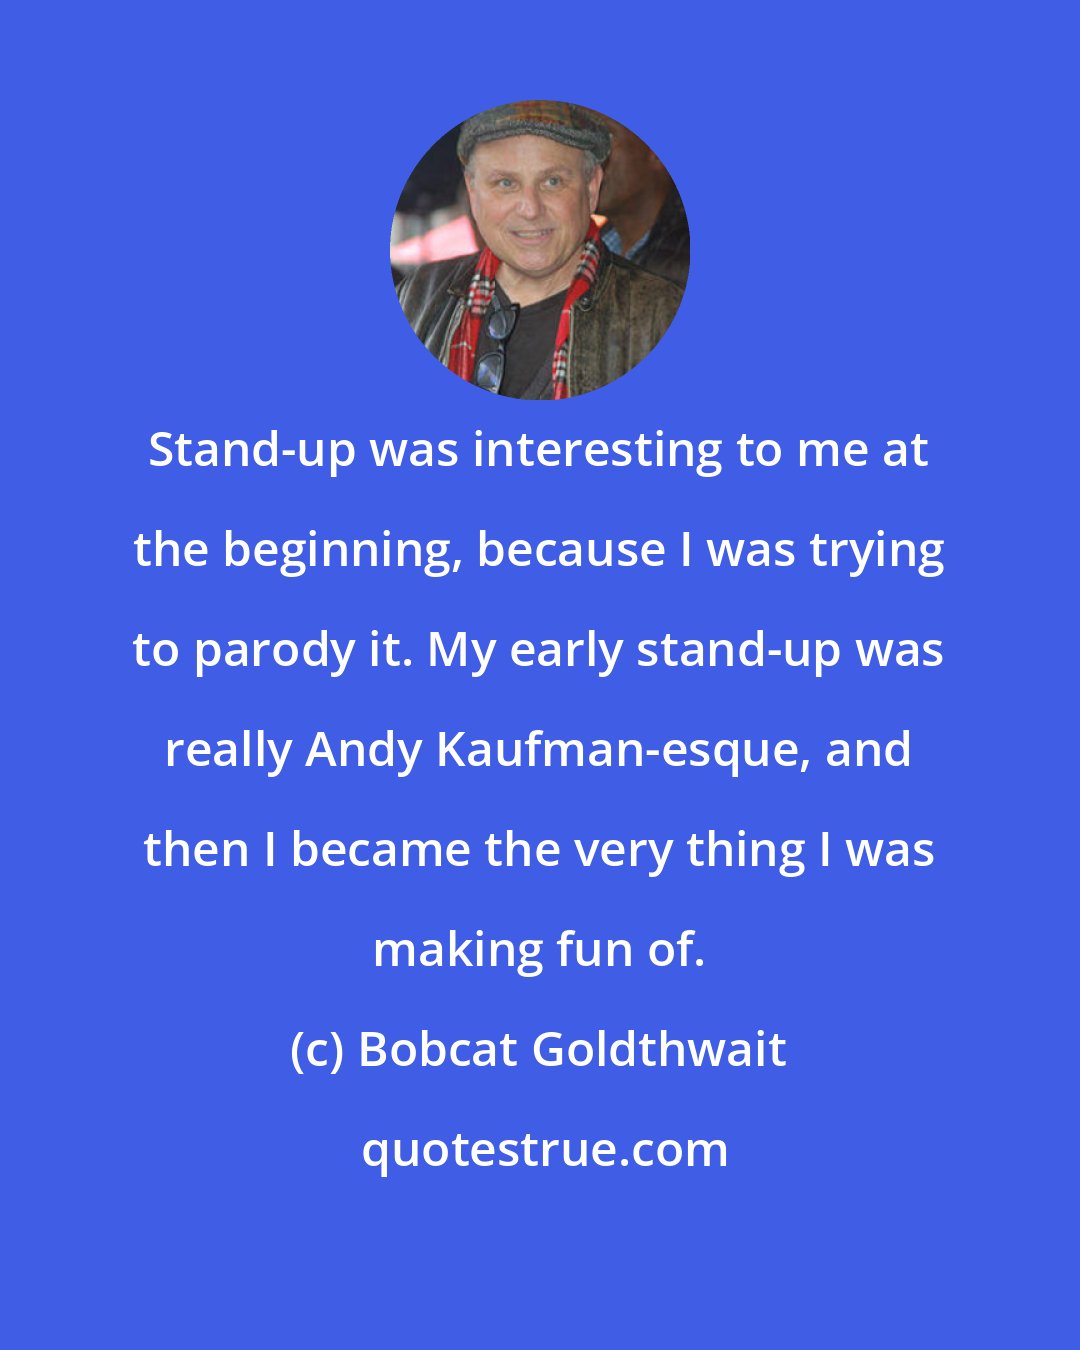 Bobcat Goldthwait: Stand-up was interesting to me at the beginning, because I was trying to parody it. My early stand-up was really Andy Kaufman-esque, and then I became the very thing I was making fun of.